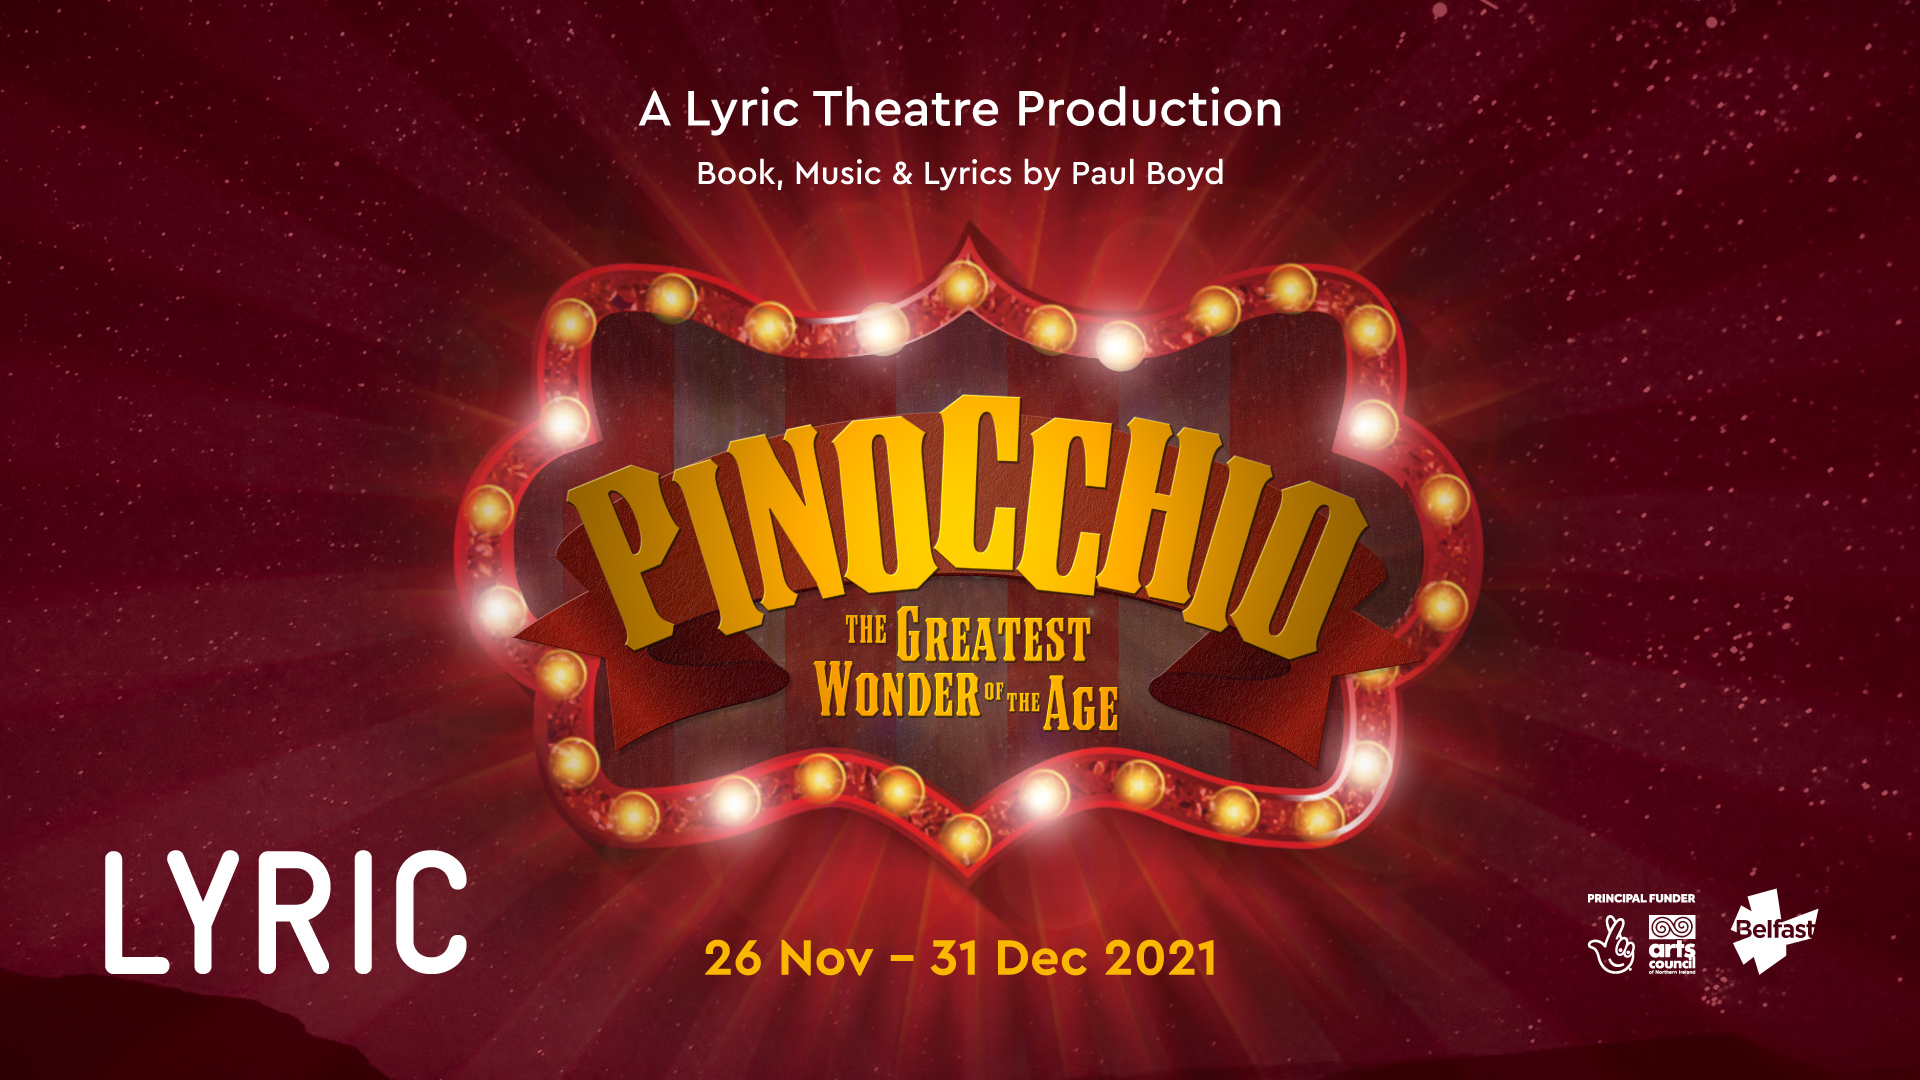 Lyric invites you to attend “Pinocchio: The Greatest Wonder of the Age”